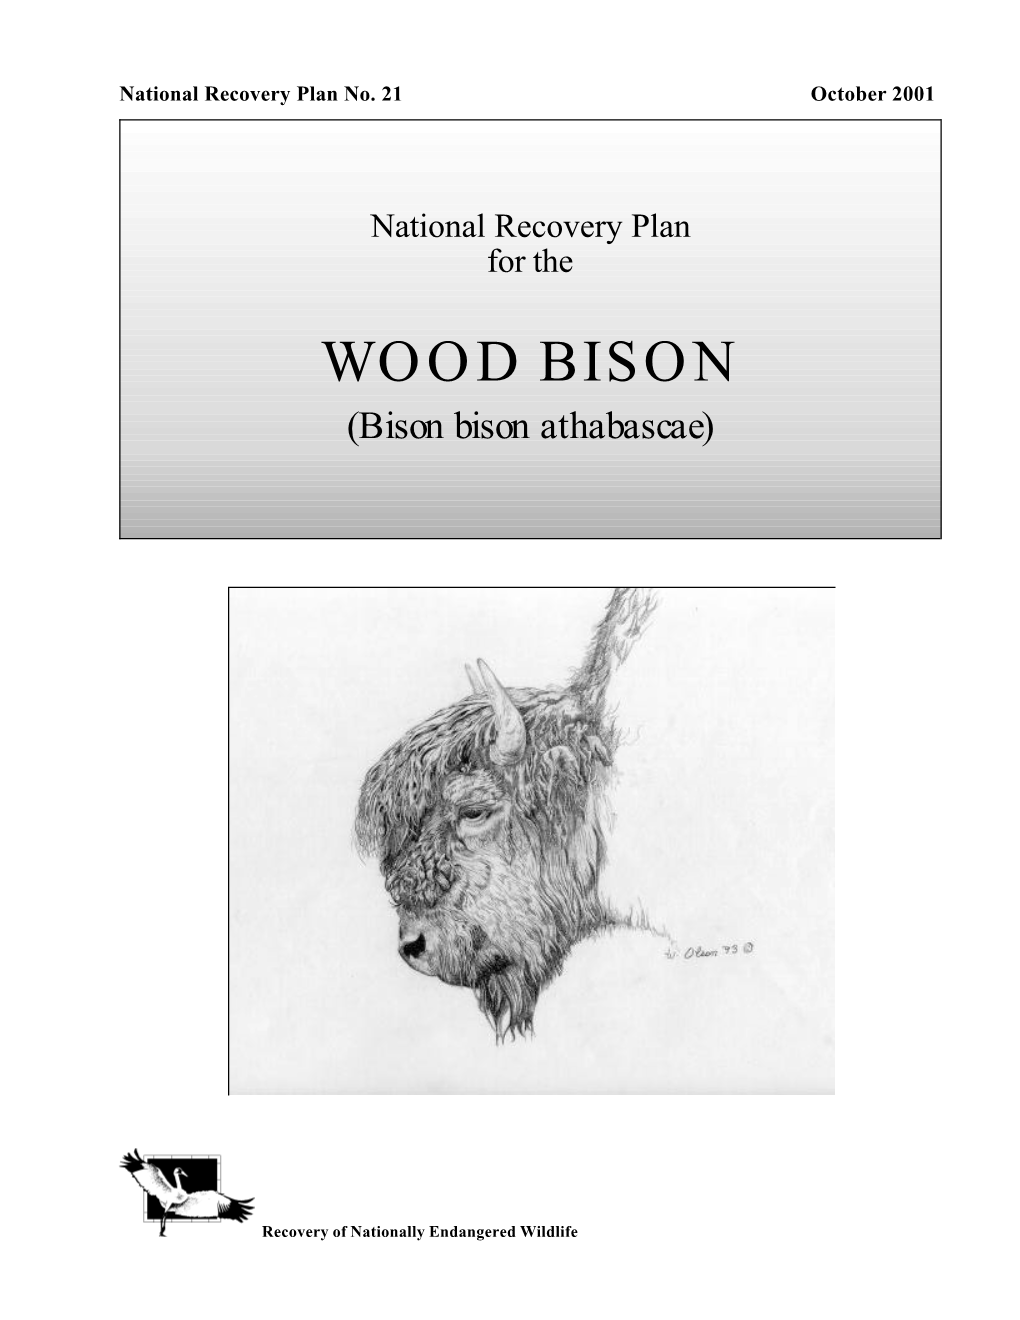 National Recovery Plan for the WOOD BISON (Bison Bison Athabascae)